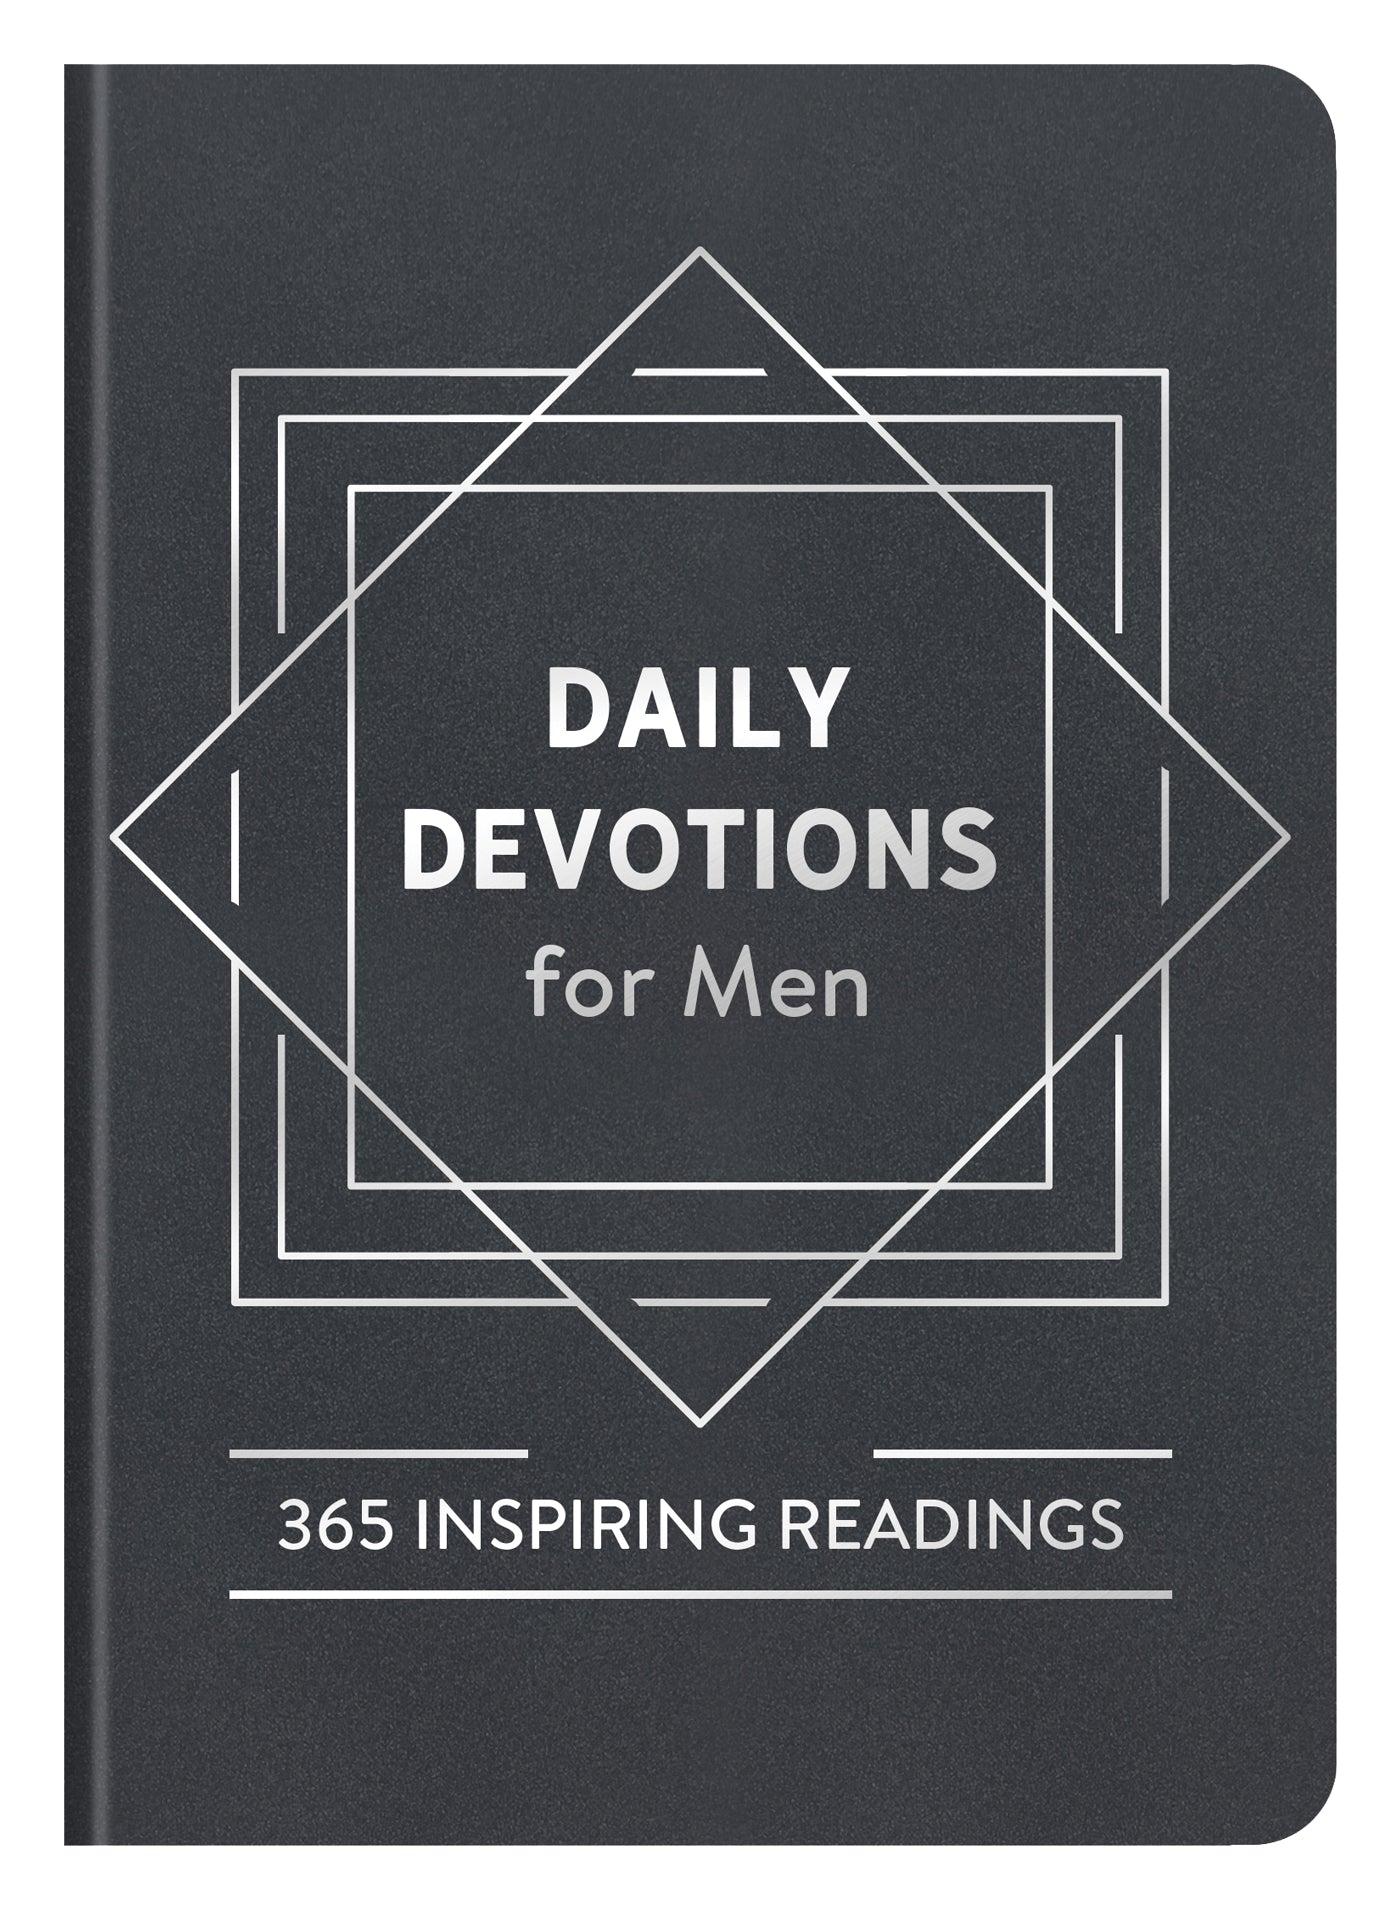 Image of Daily Devotions for Men other